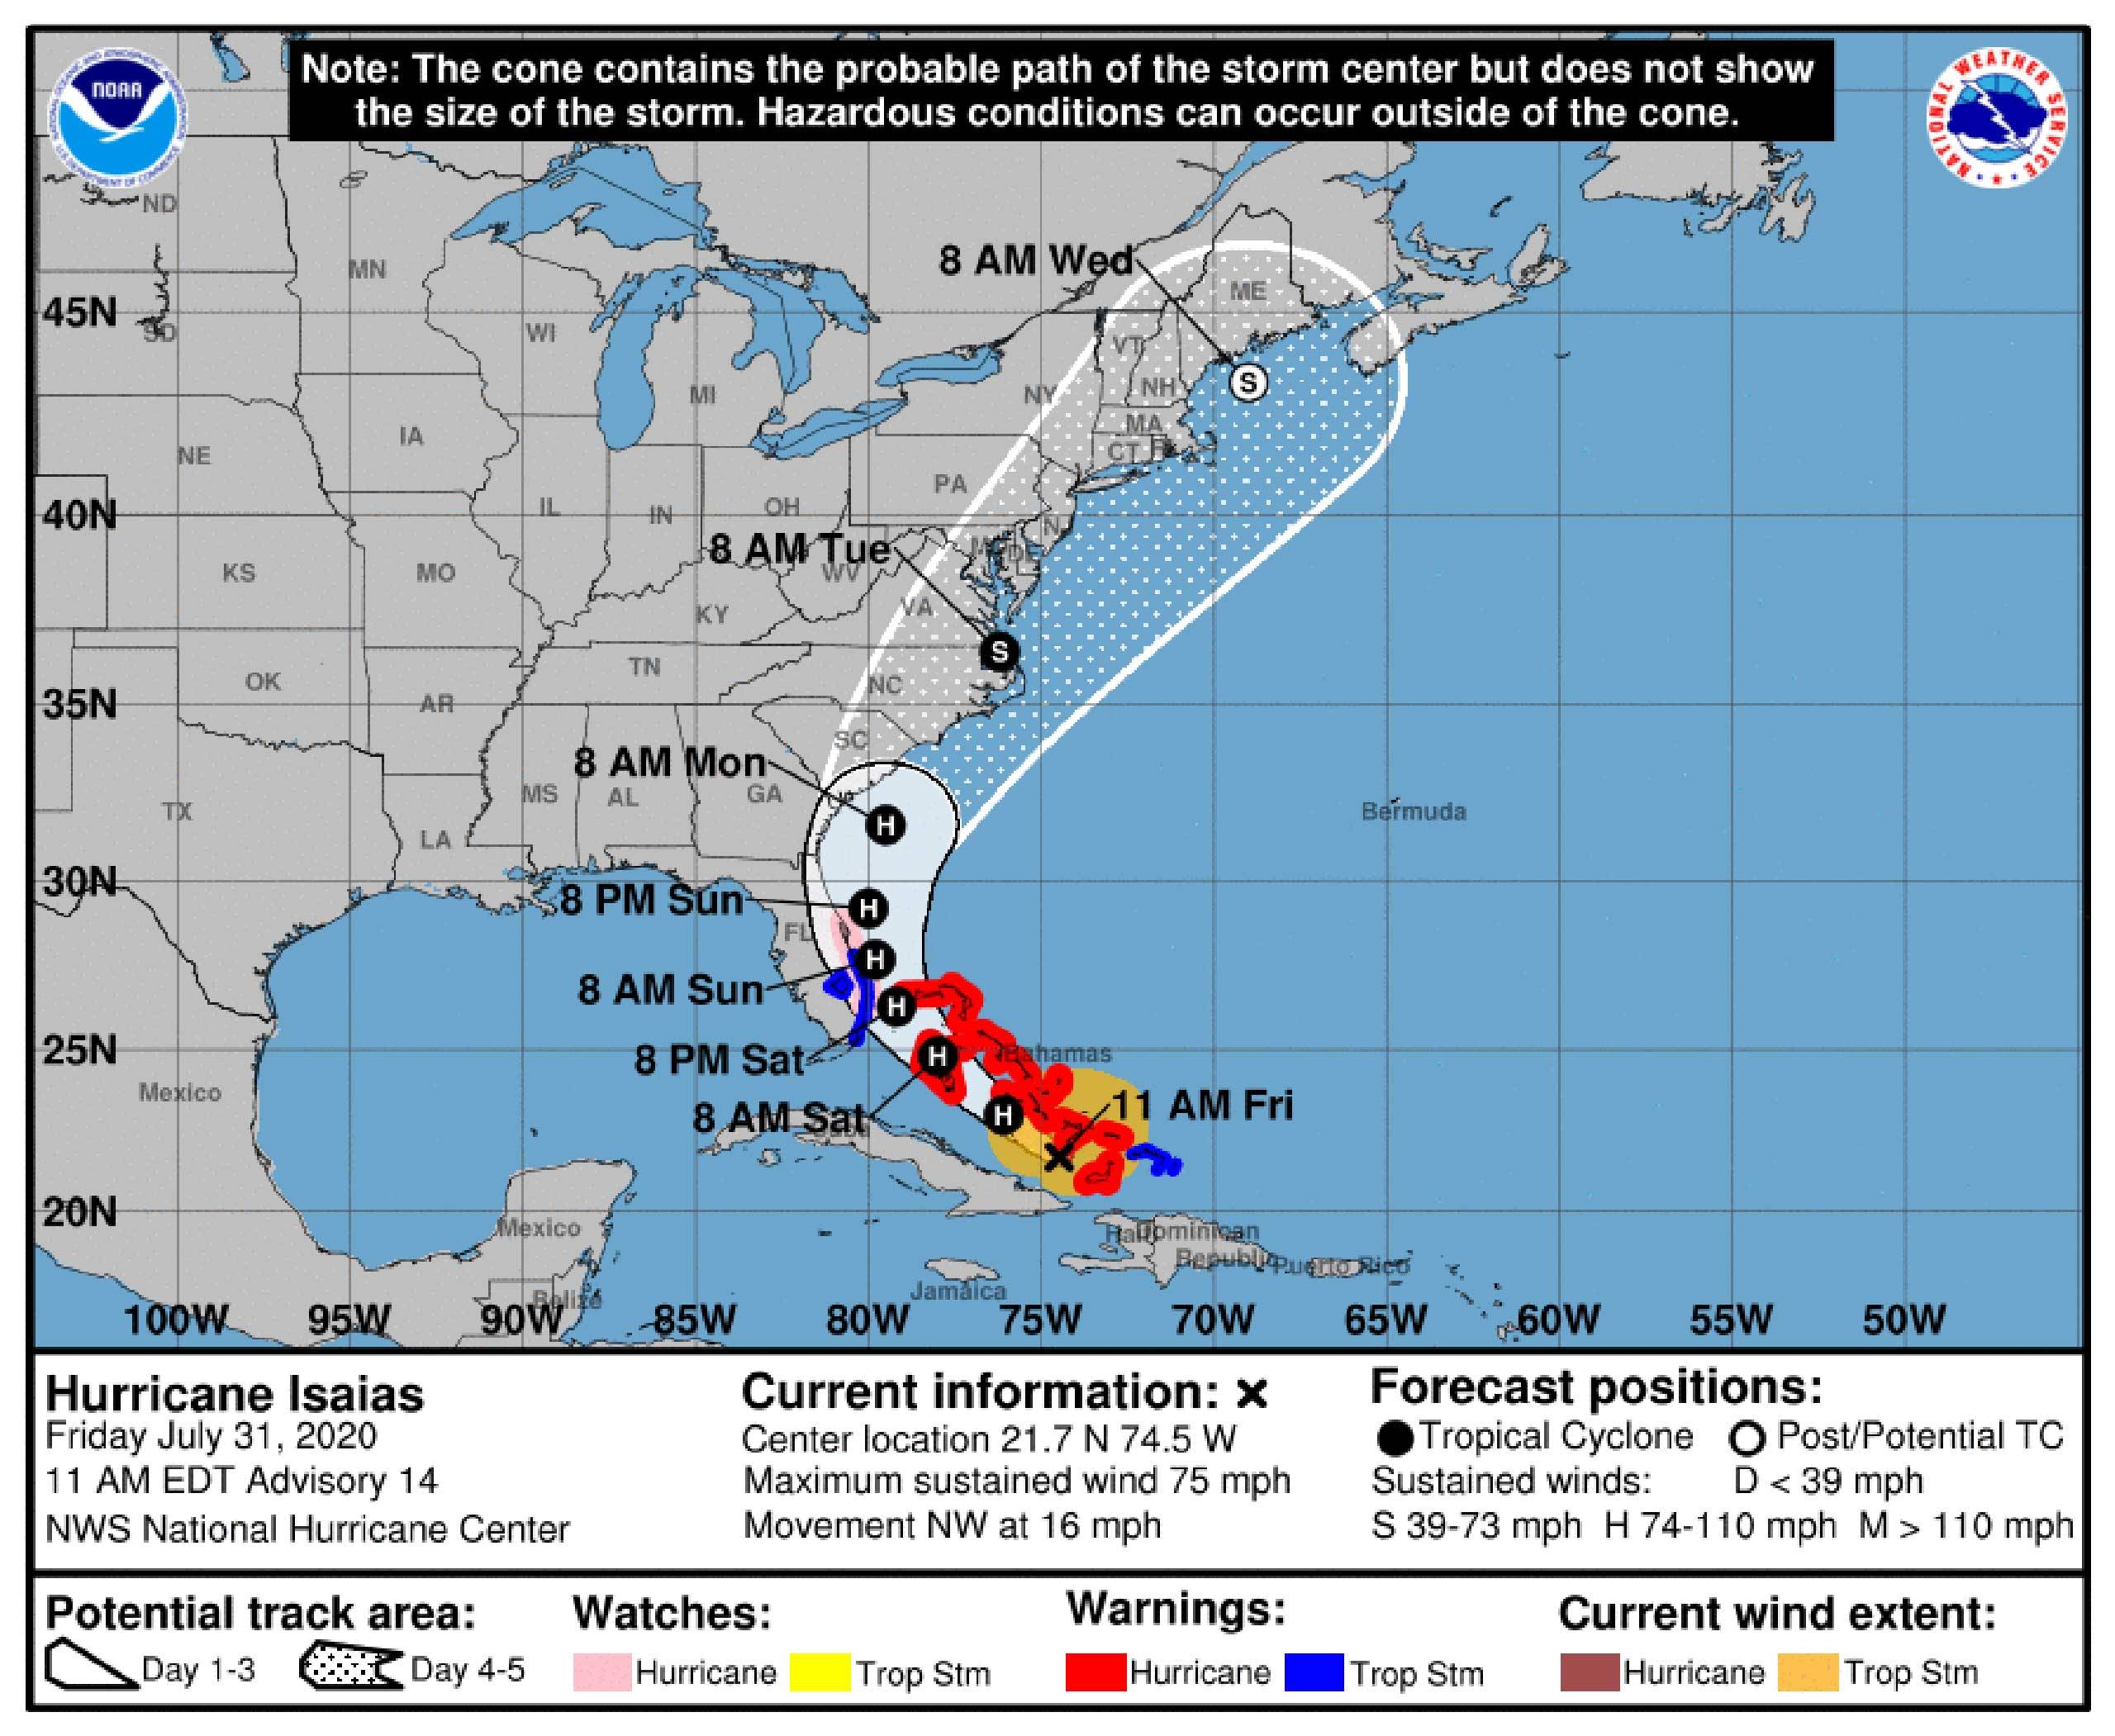 Hurricane Isaias effects may be felt as early as late Saturday night at Walt Disney World